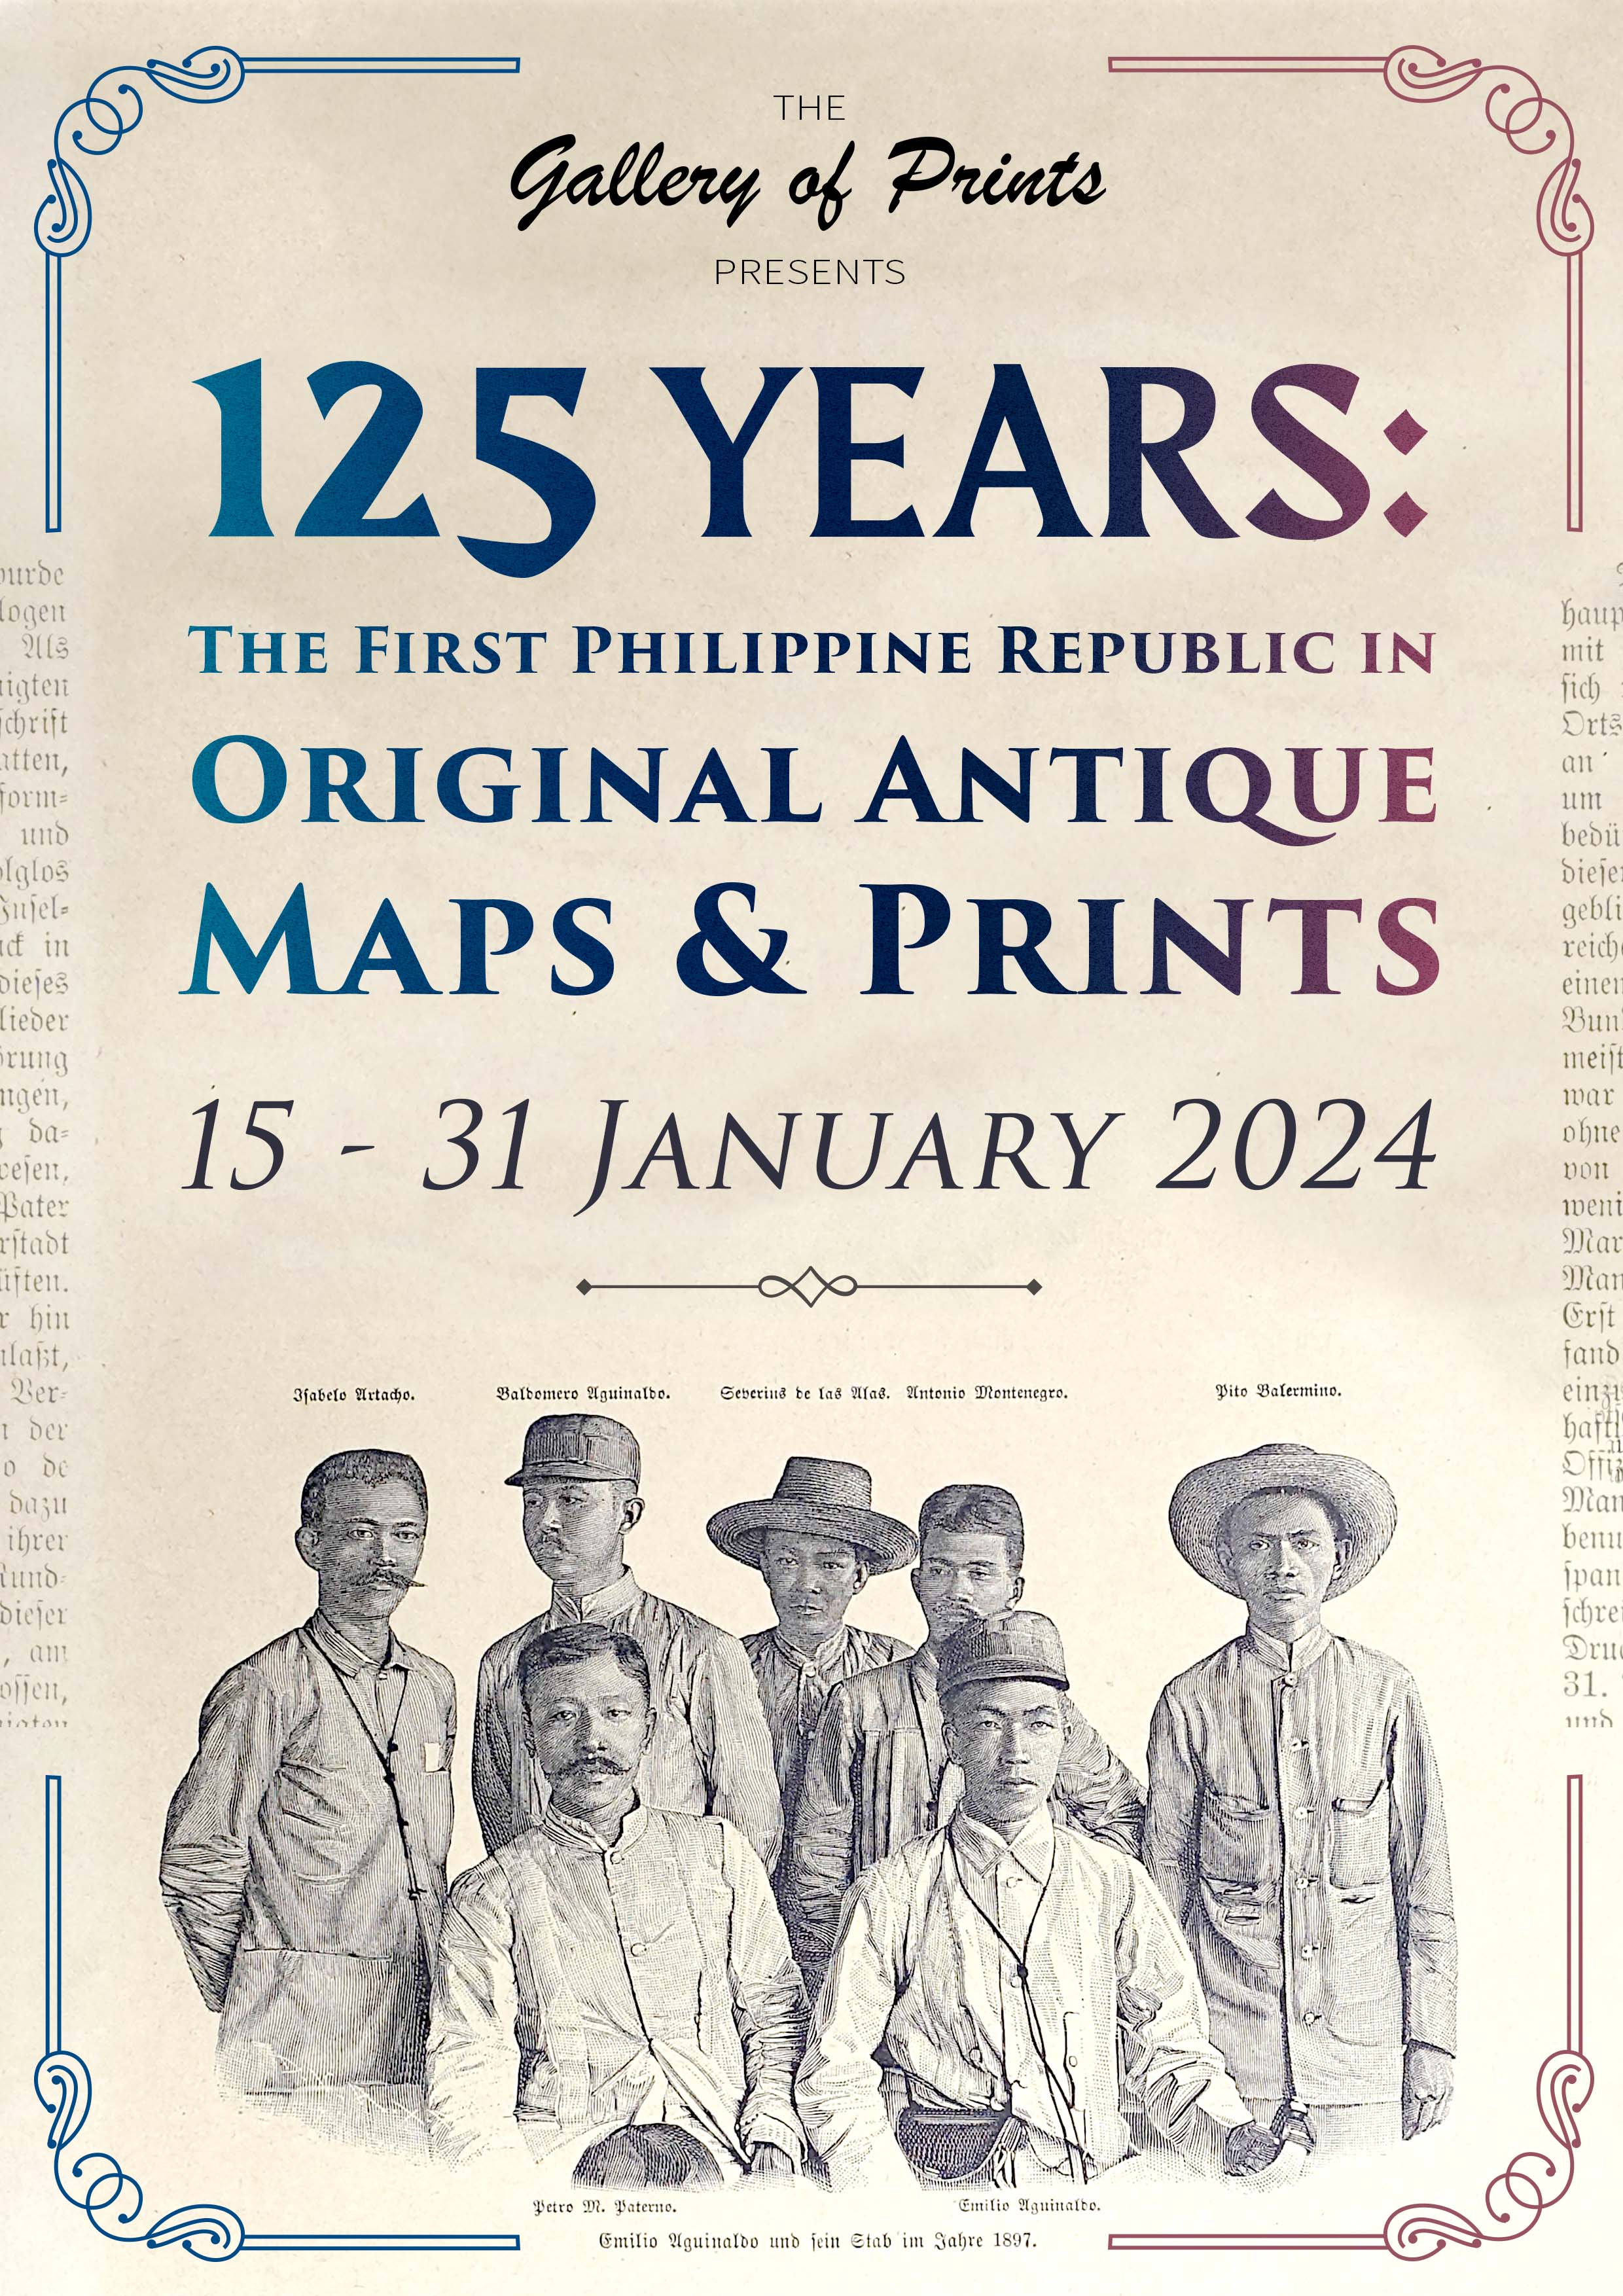 125 Years | The First Philippine Republic in Original Antique Maps & Prints